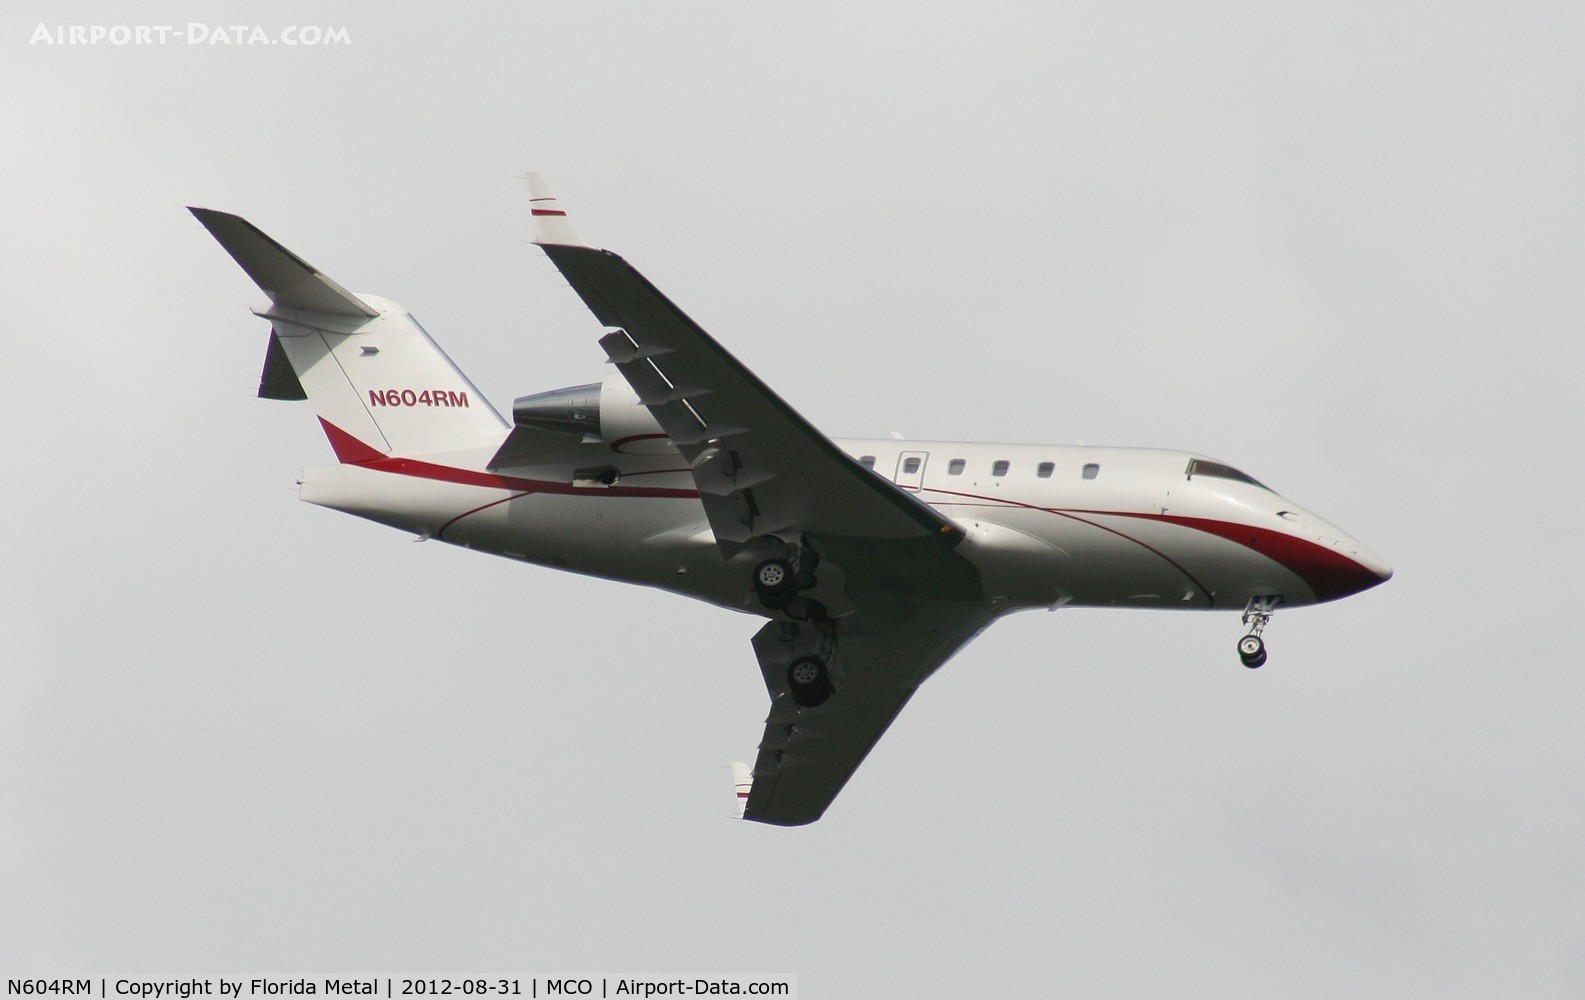 N604RM, 2000 Bombardier Challenger 604 (CL-600-2B16) C/N 5441, Challenger 604